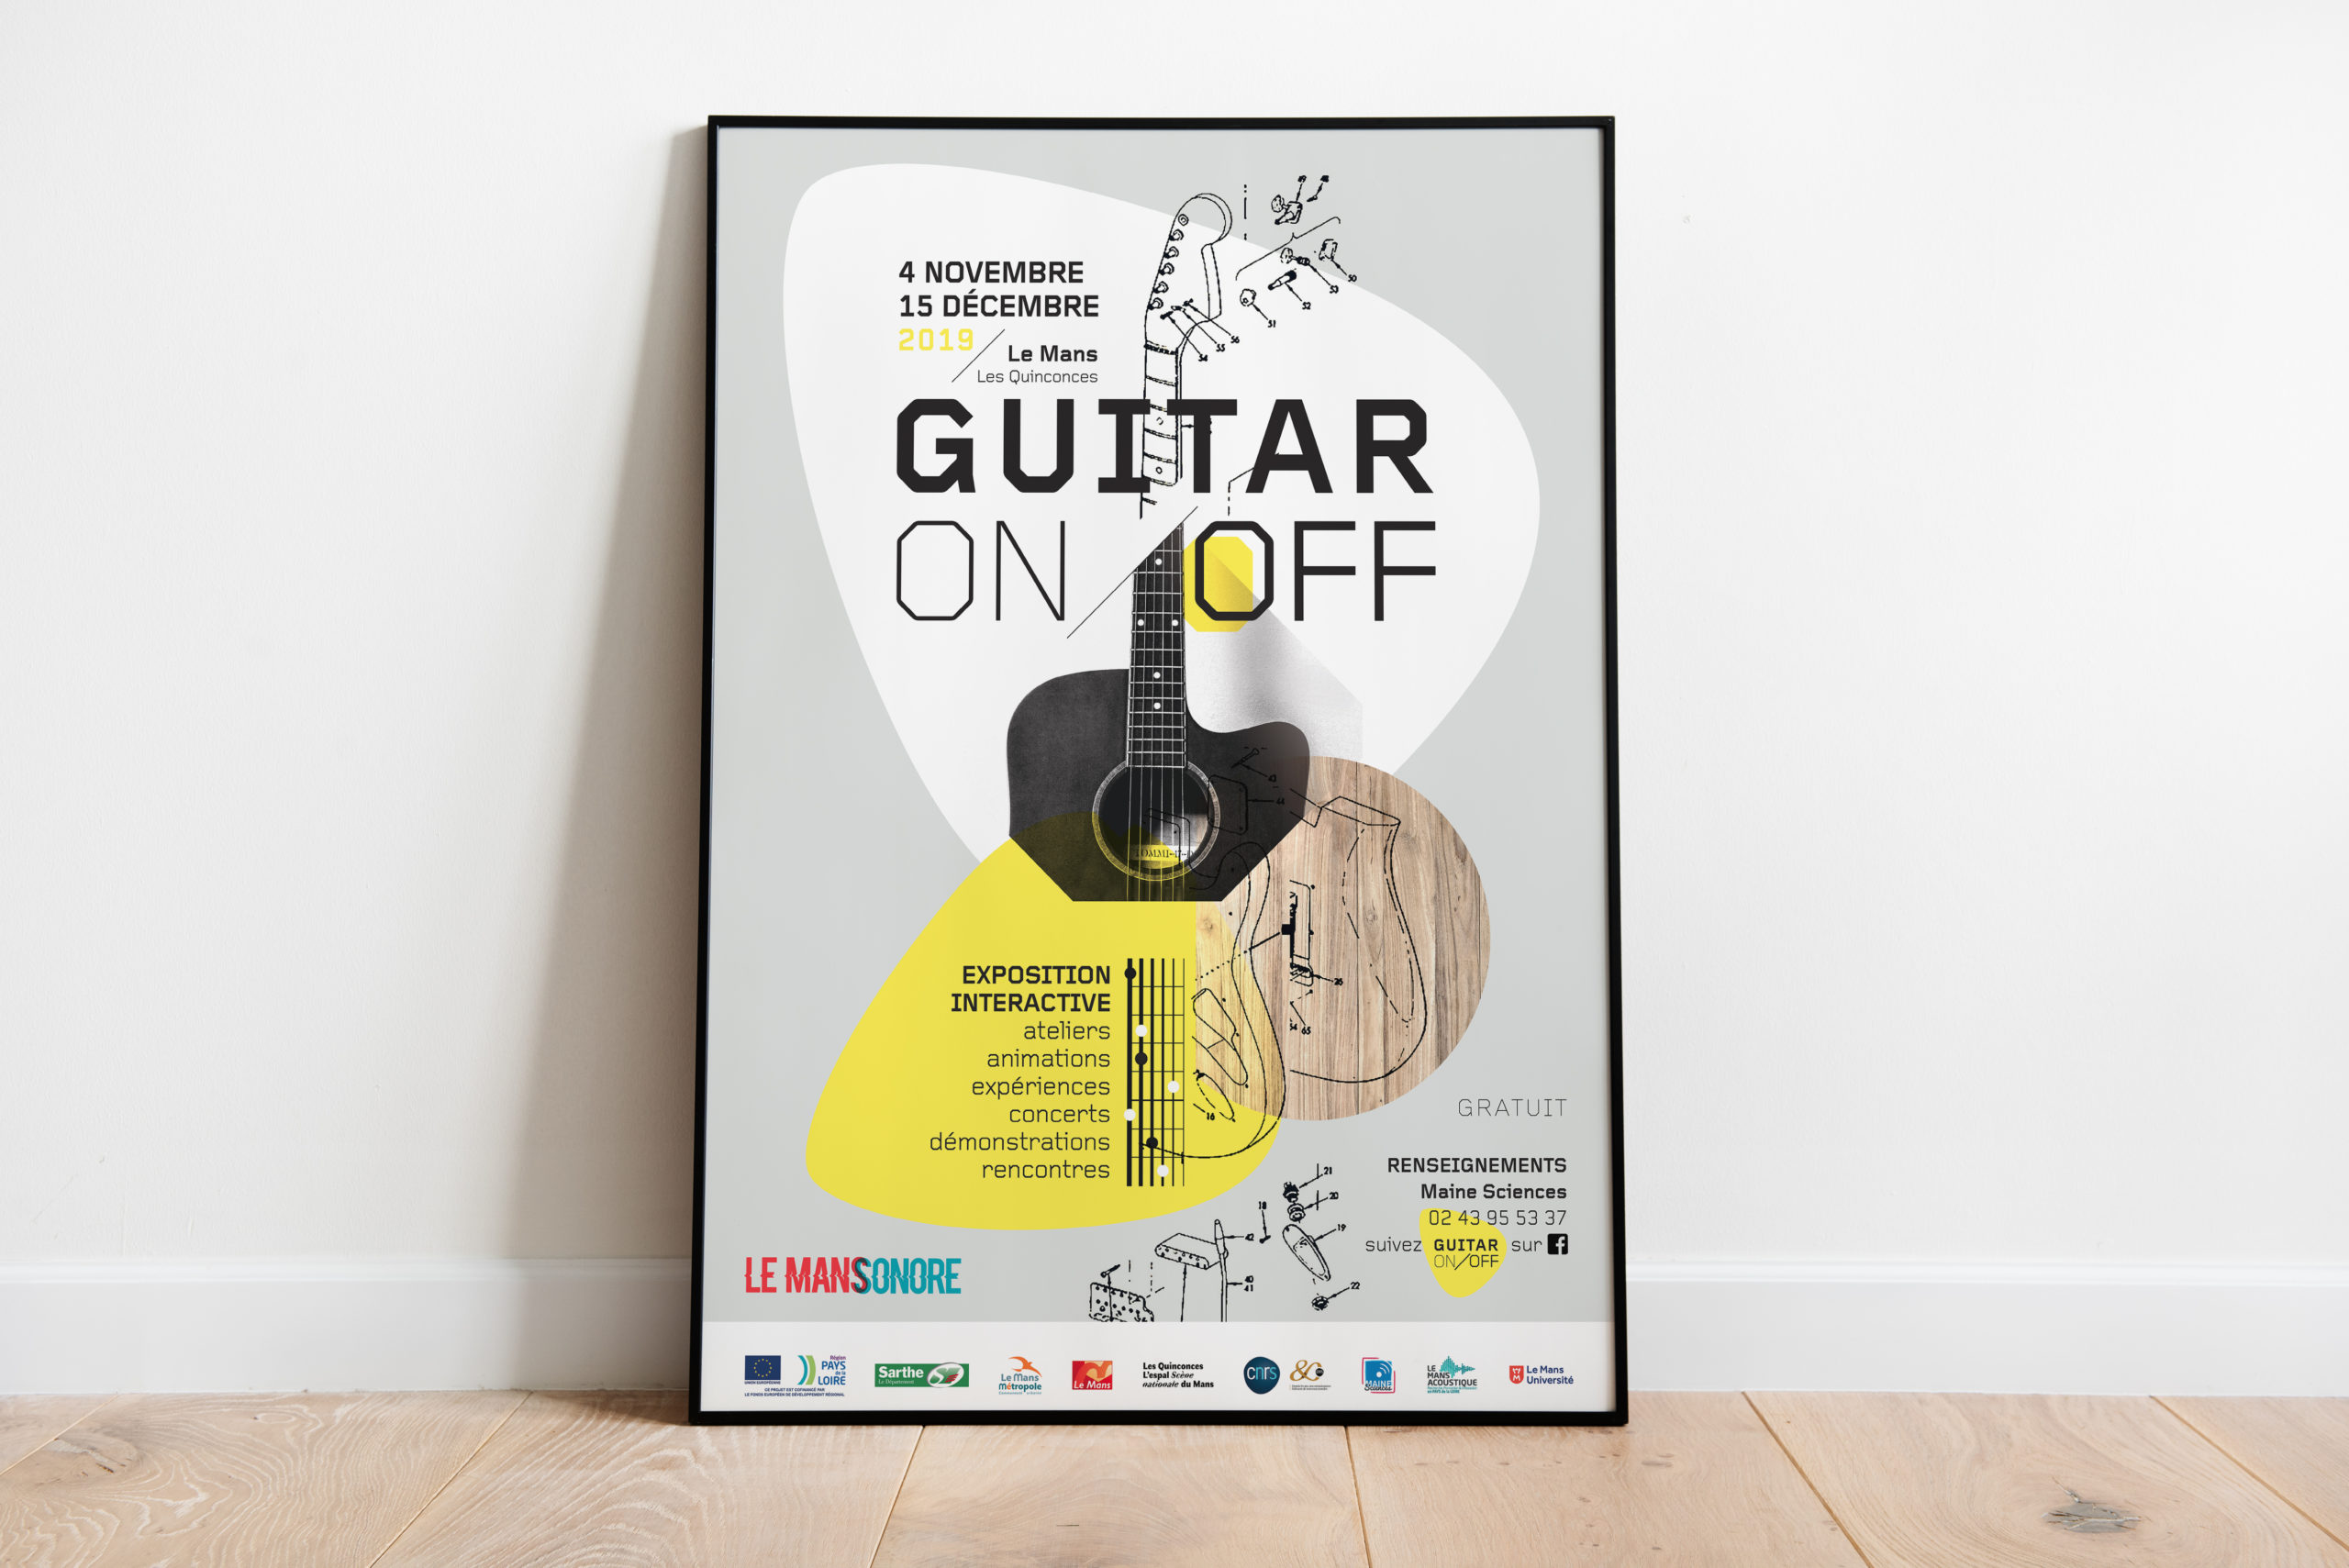 Guitare on off affiche helene laforet graphiste